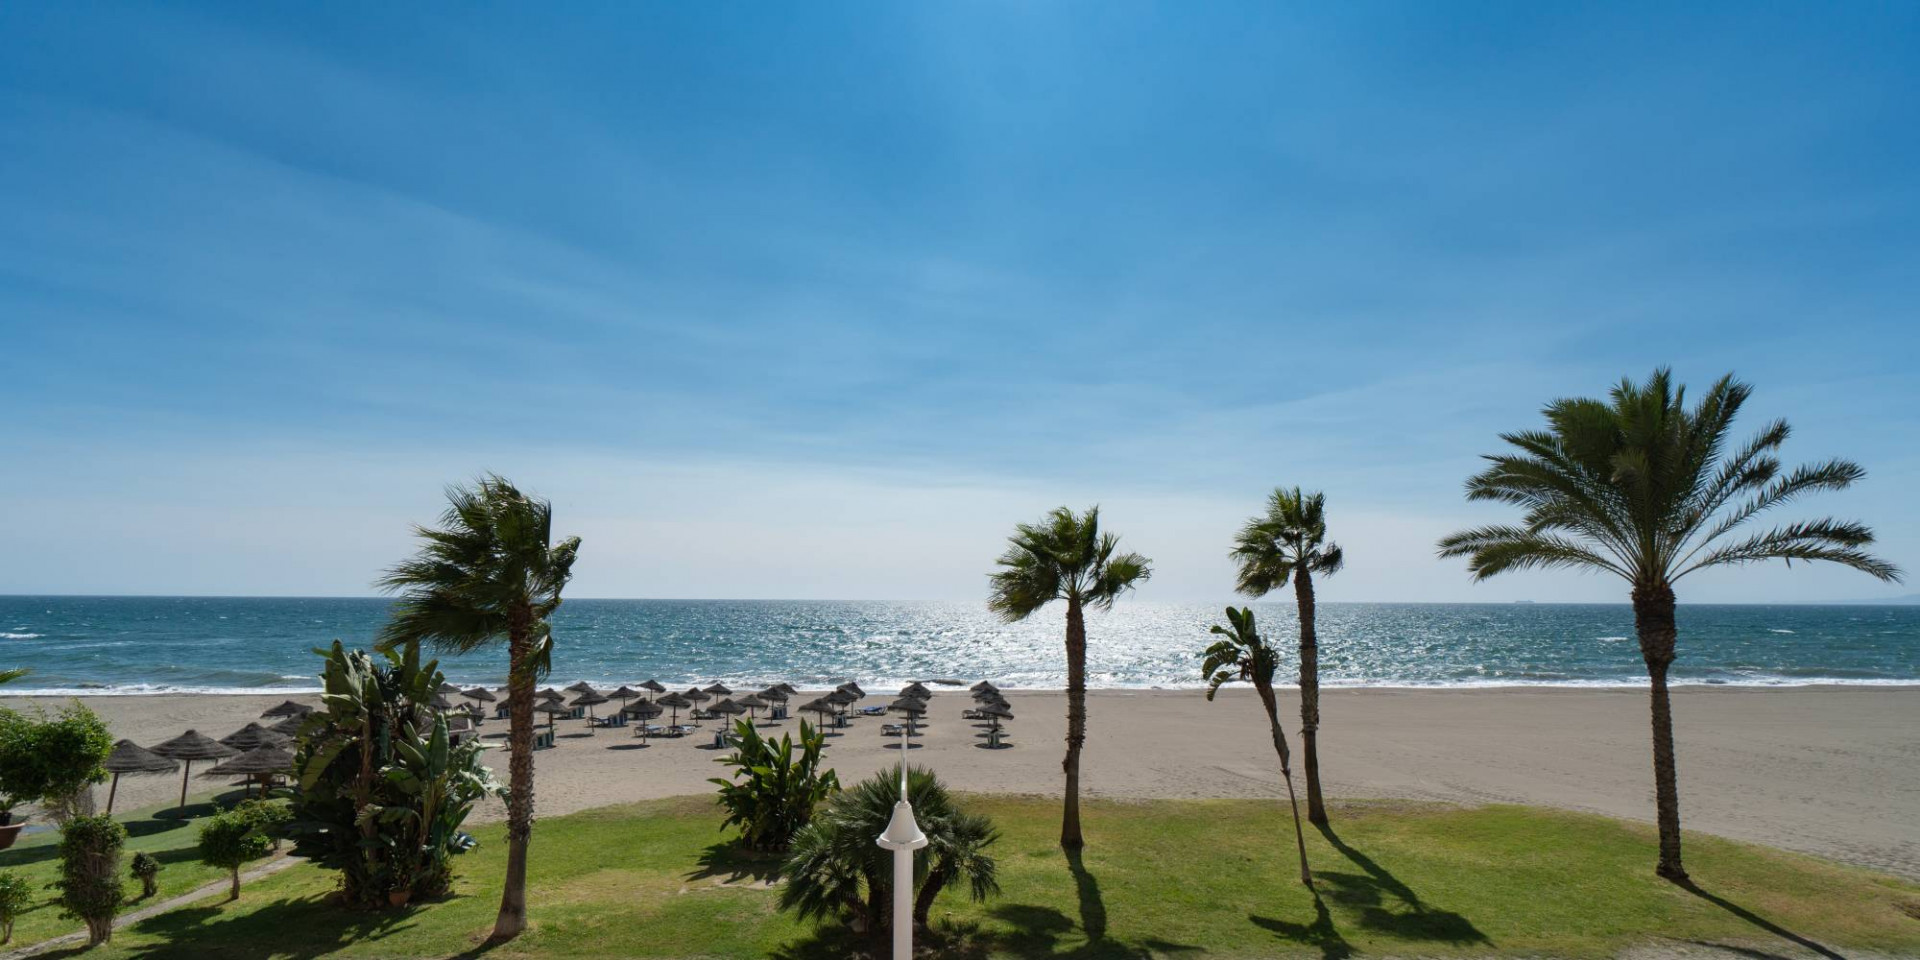 Sale of a 4 star hotel with 87 rooms on the beachfront and with high potential on the Costa del Sol | Image 5